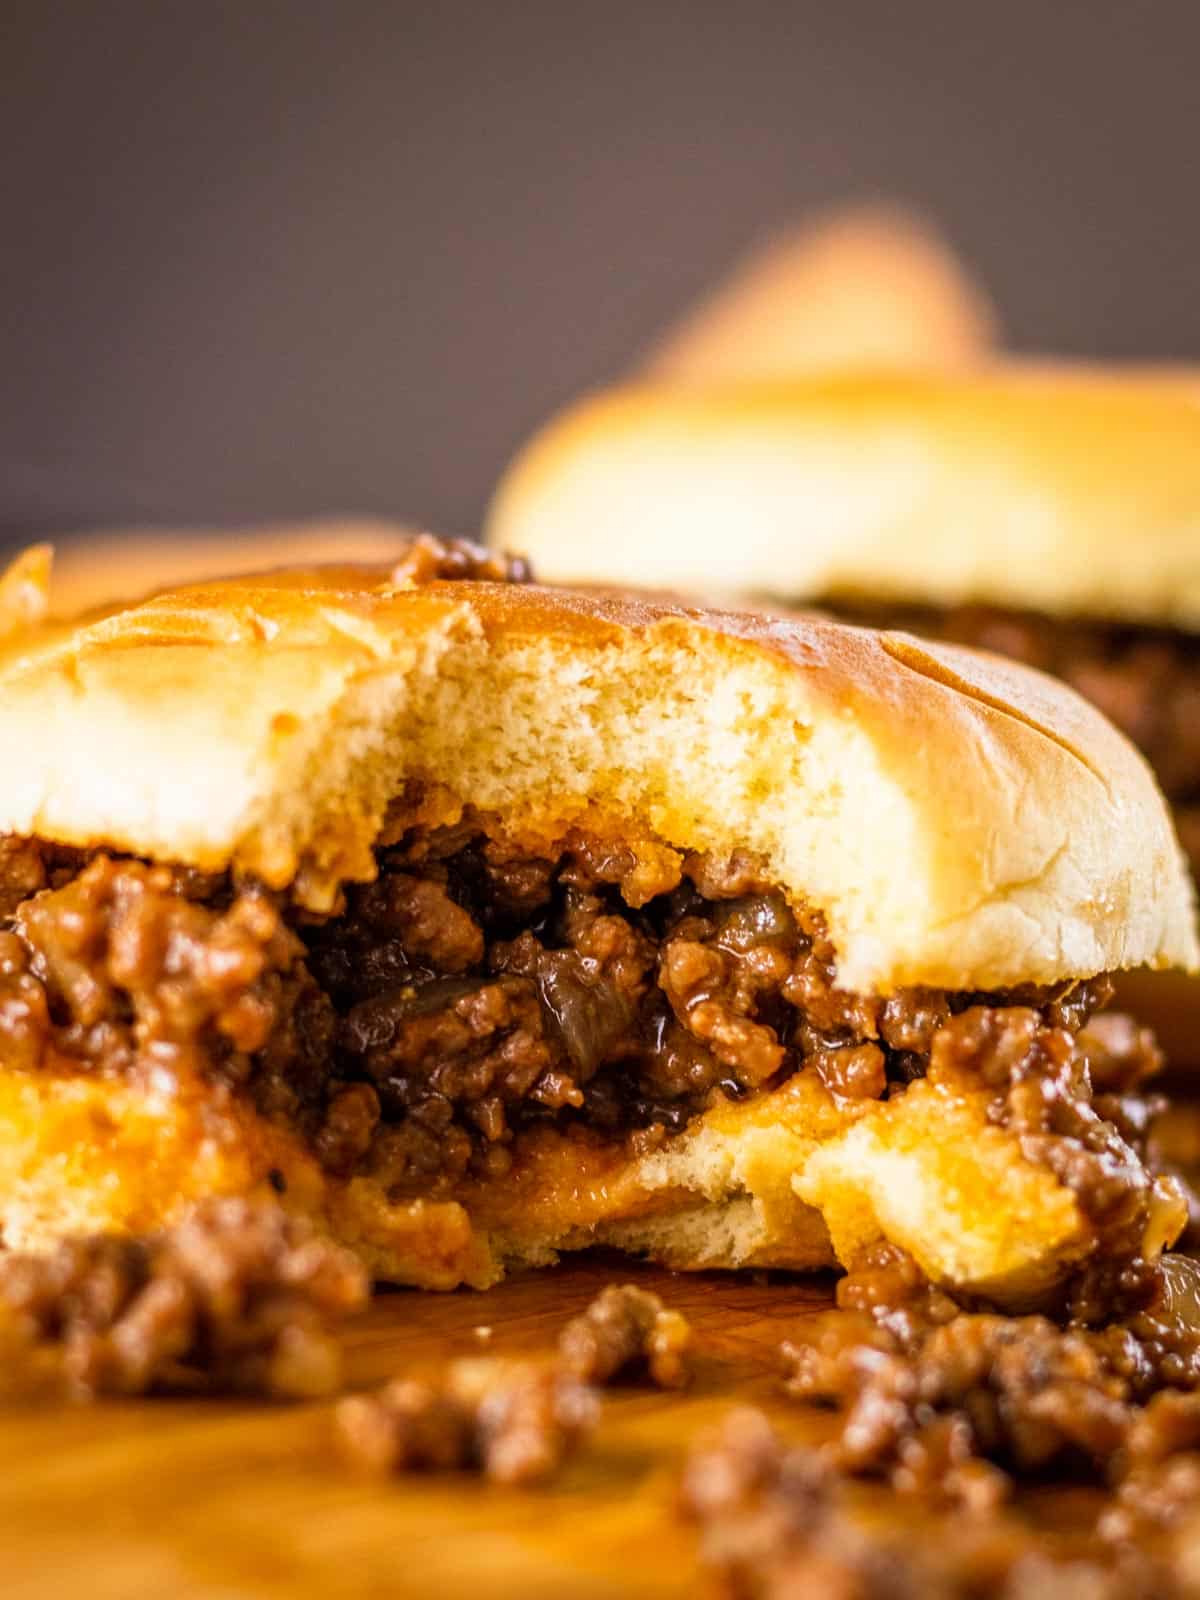 sloppy joe sandwich on wooden tray with a bite taken from it and meat spilling out.